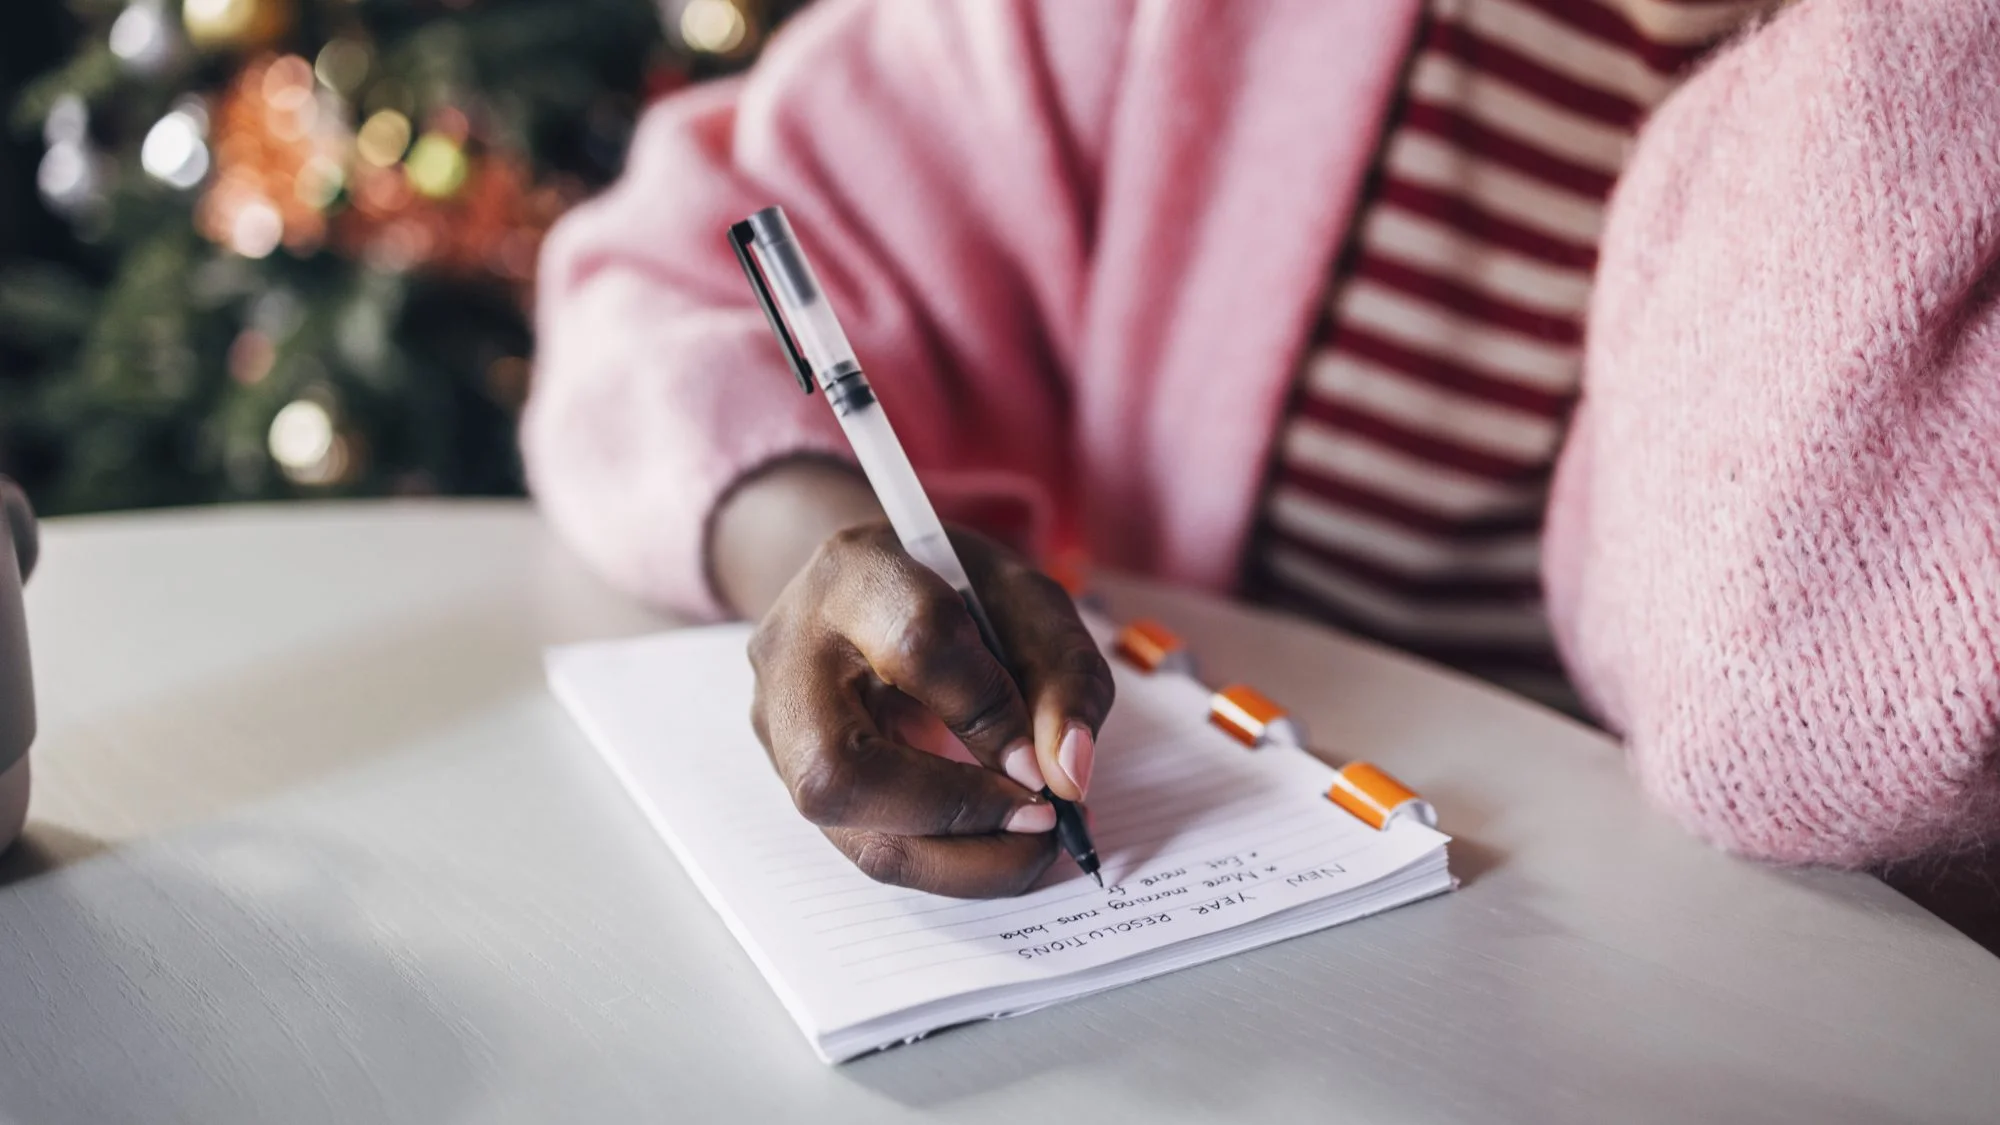 A Black woman wearing a pink sweater and striped pink shirt writes her New Year's resolutions on a notebook.